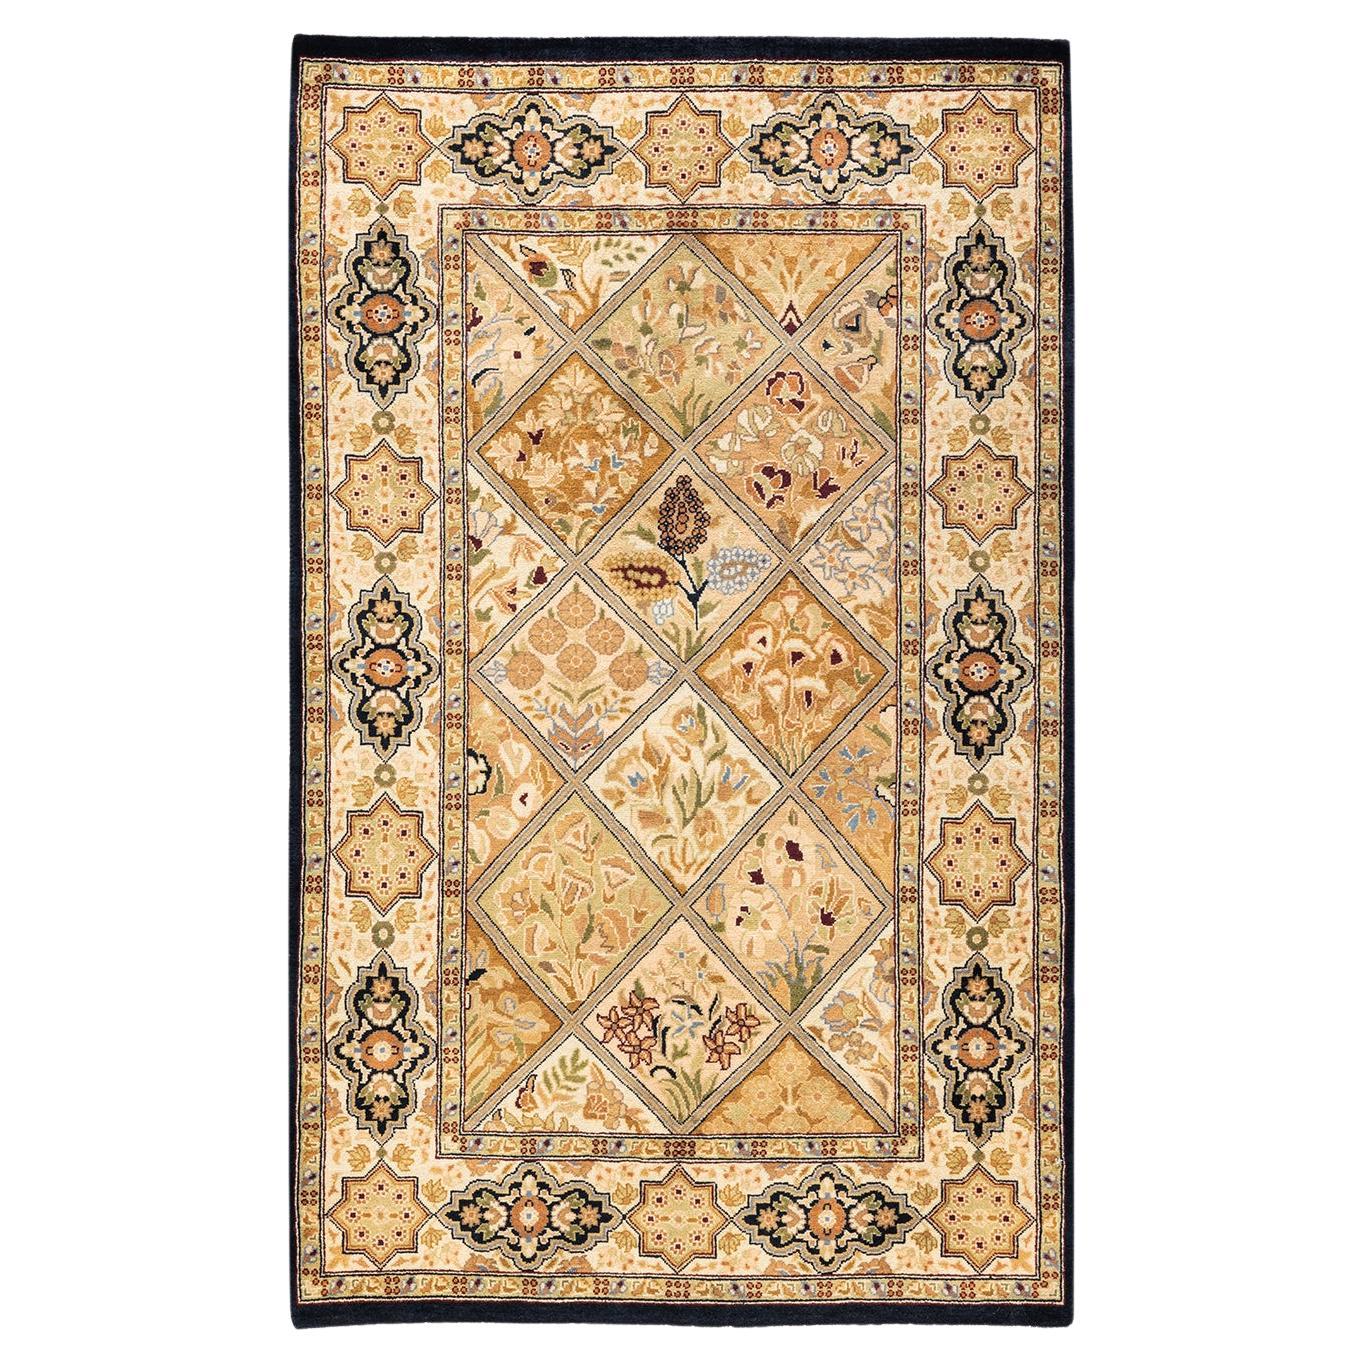 One-of-a-Kind Hand Knotted Wool Mogul Brown Area Rug